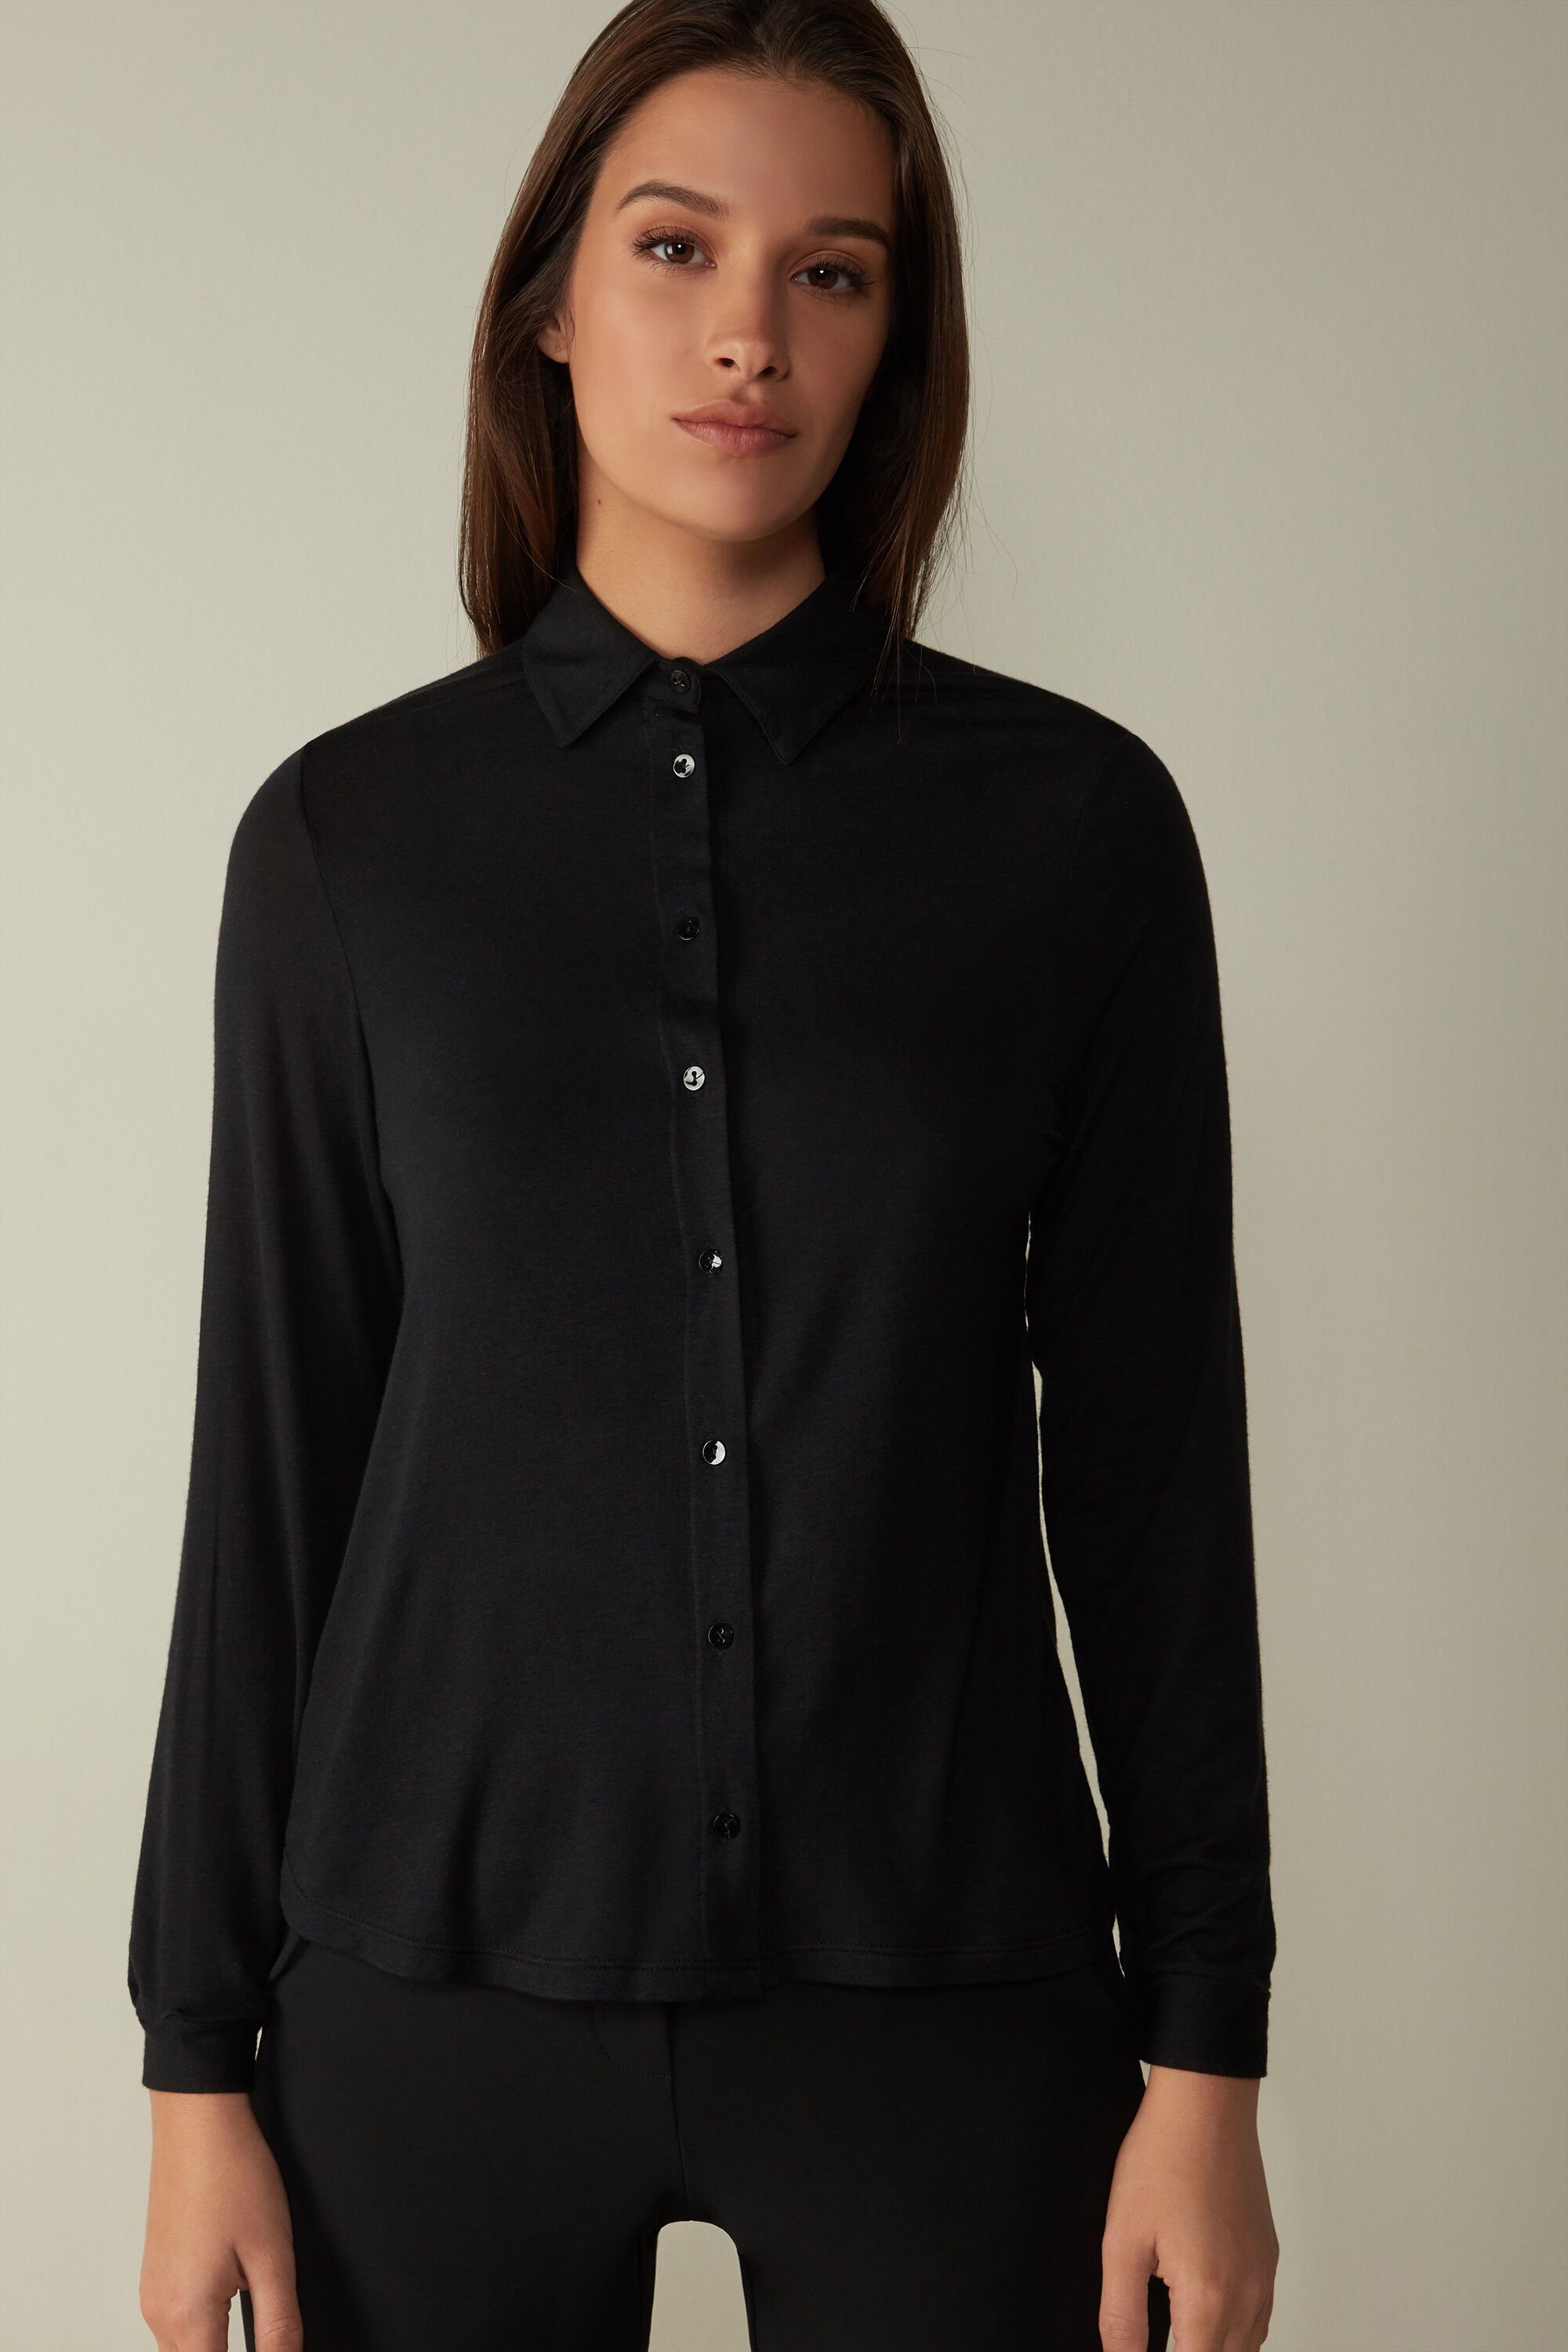 Ultralight Modal With Cashmere Long-Sleeved Shirt | Intimissimi